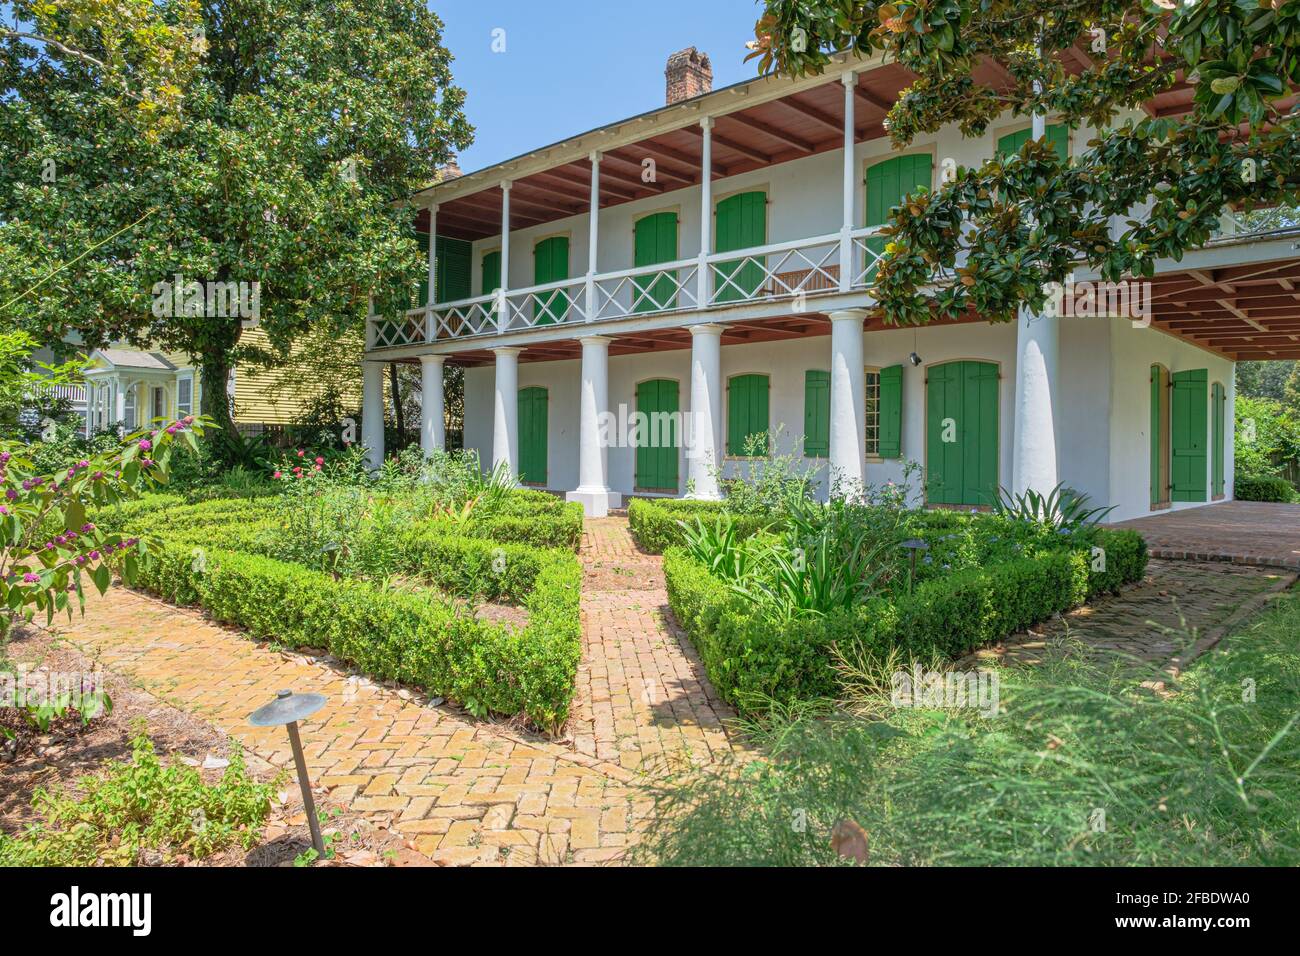 NEW ORLEANS, LA, USA - AUGUST 11, 2020: Historic Pitot House on Moss Street Stock Photo